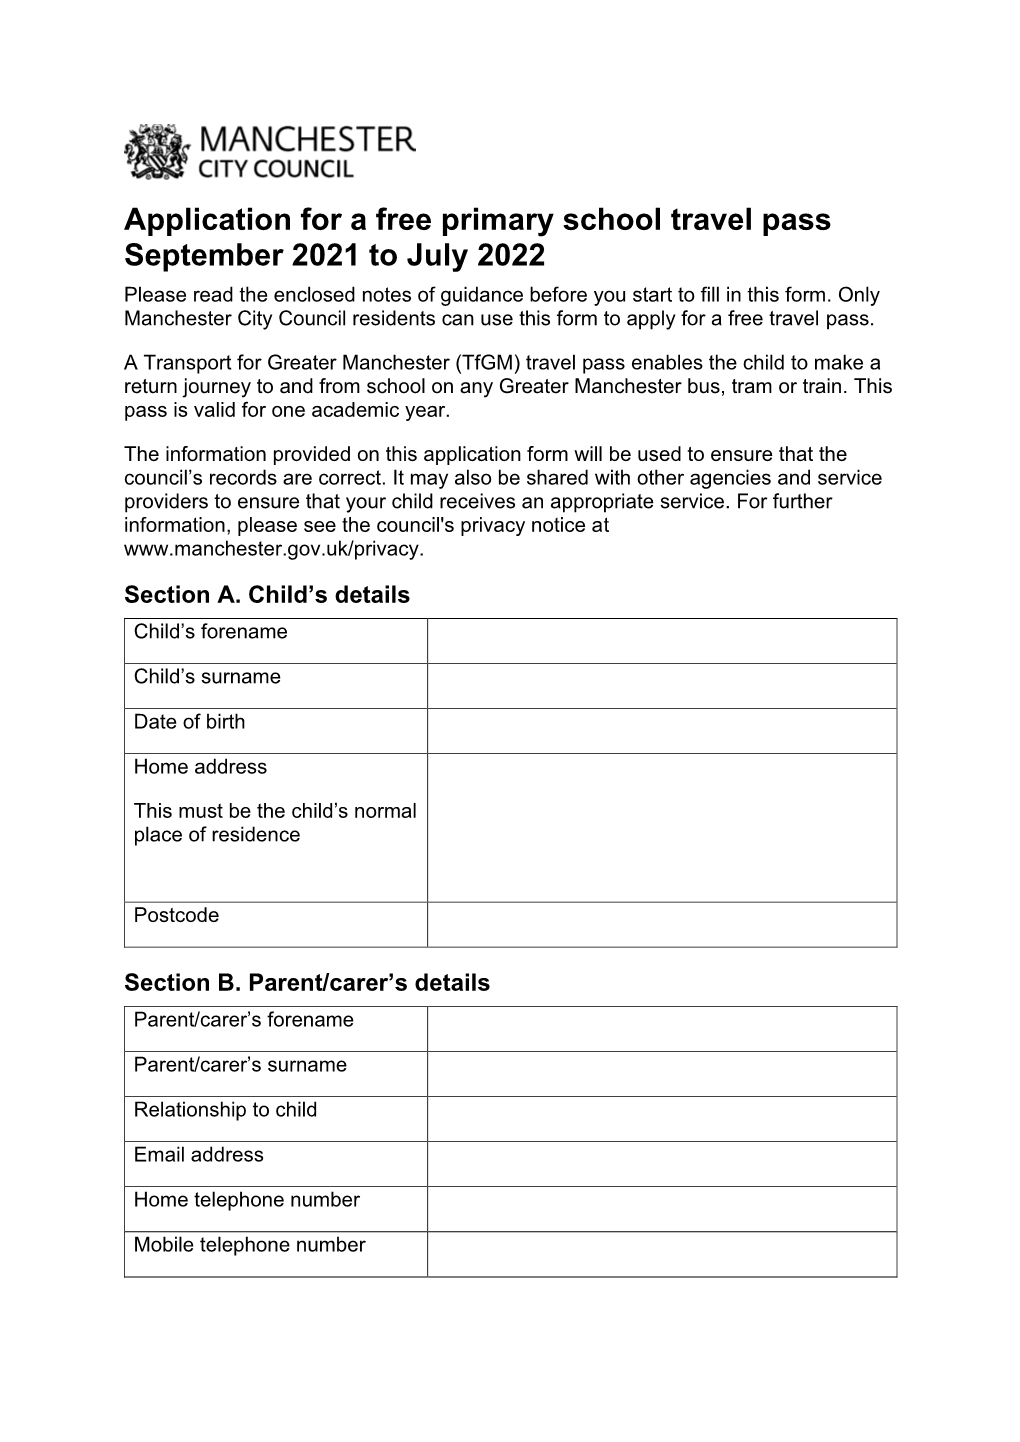 Application for a Free Primary School Travel Pass September 2021 to July 2022 Please Read the Enclosed Notes of Guidance Before You Start to Fill in This Form